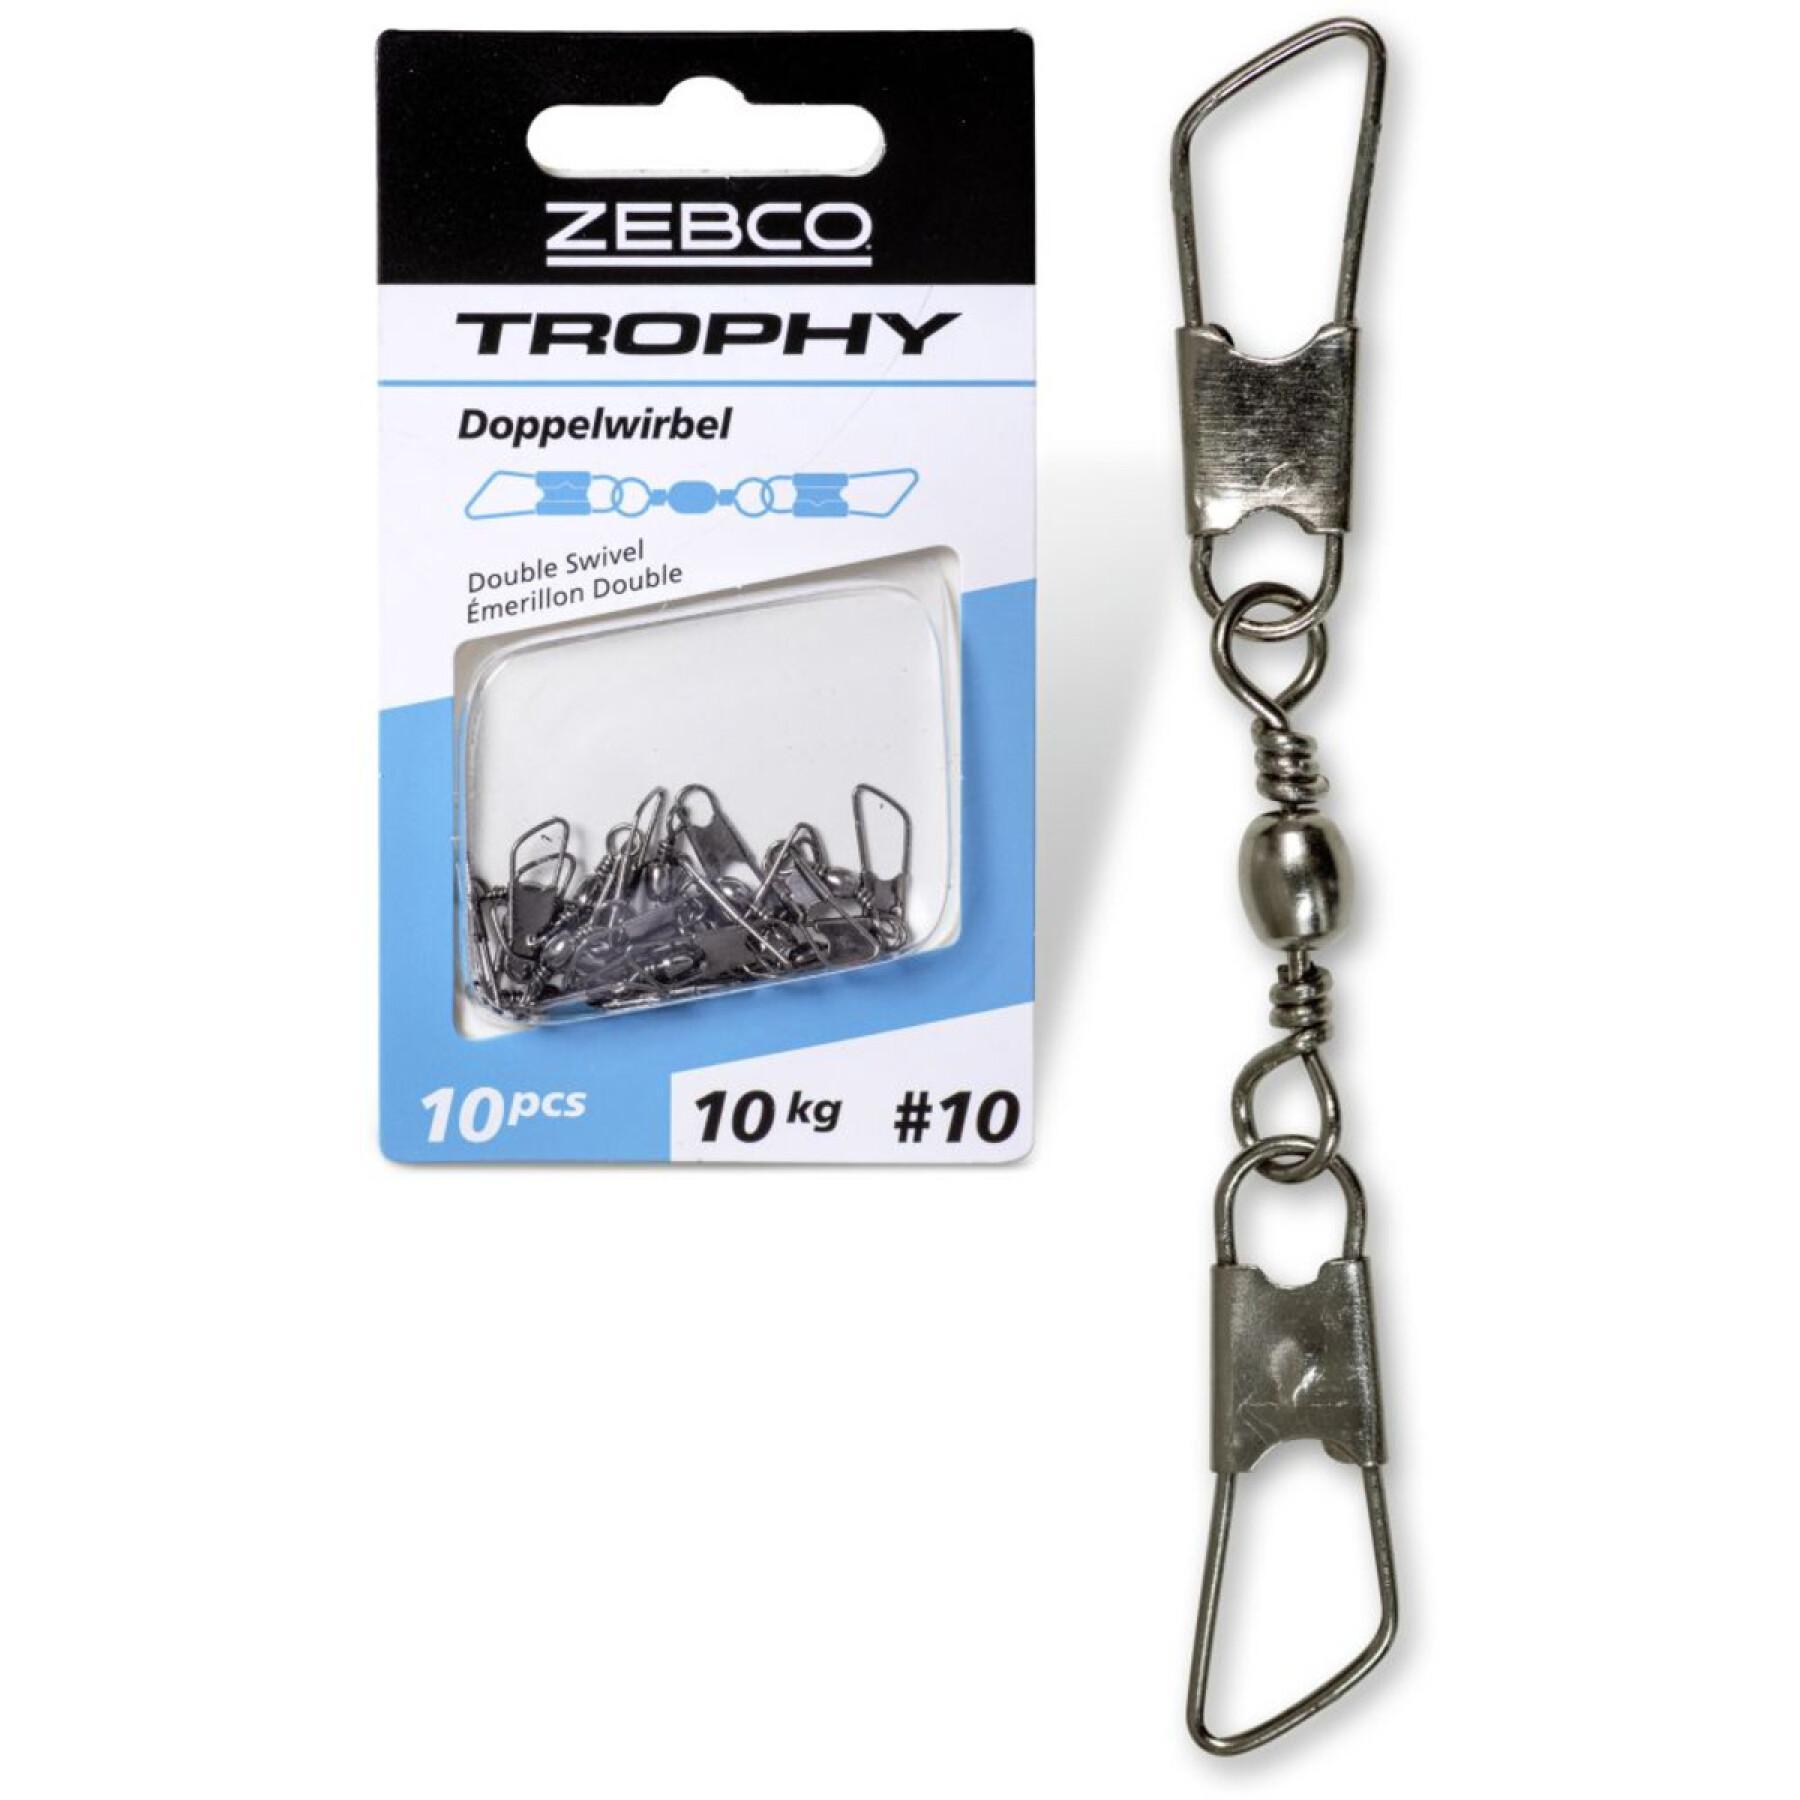 Pack of 10 pieces of double swivels Zebco Trophy